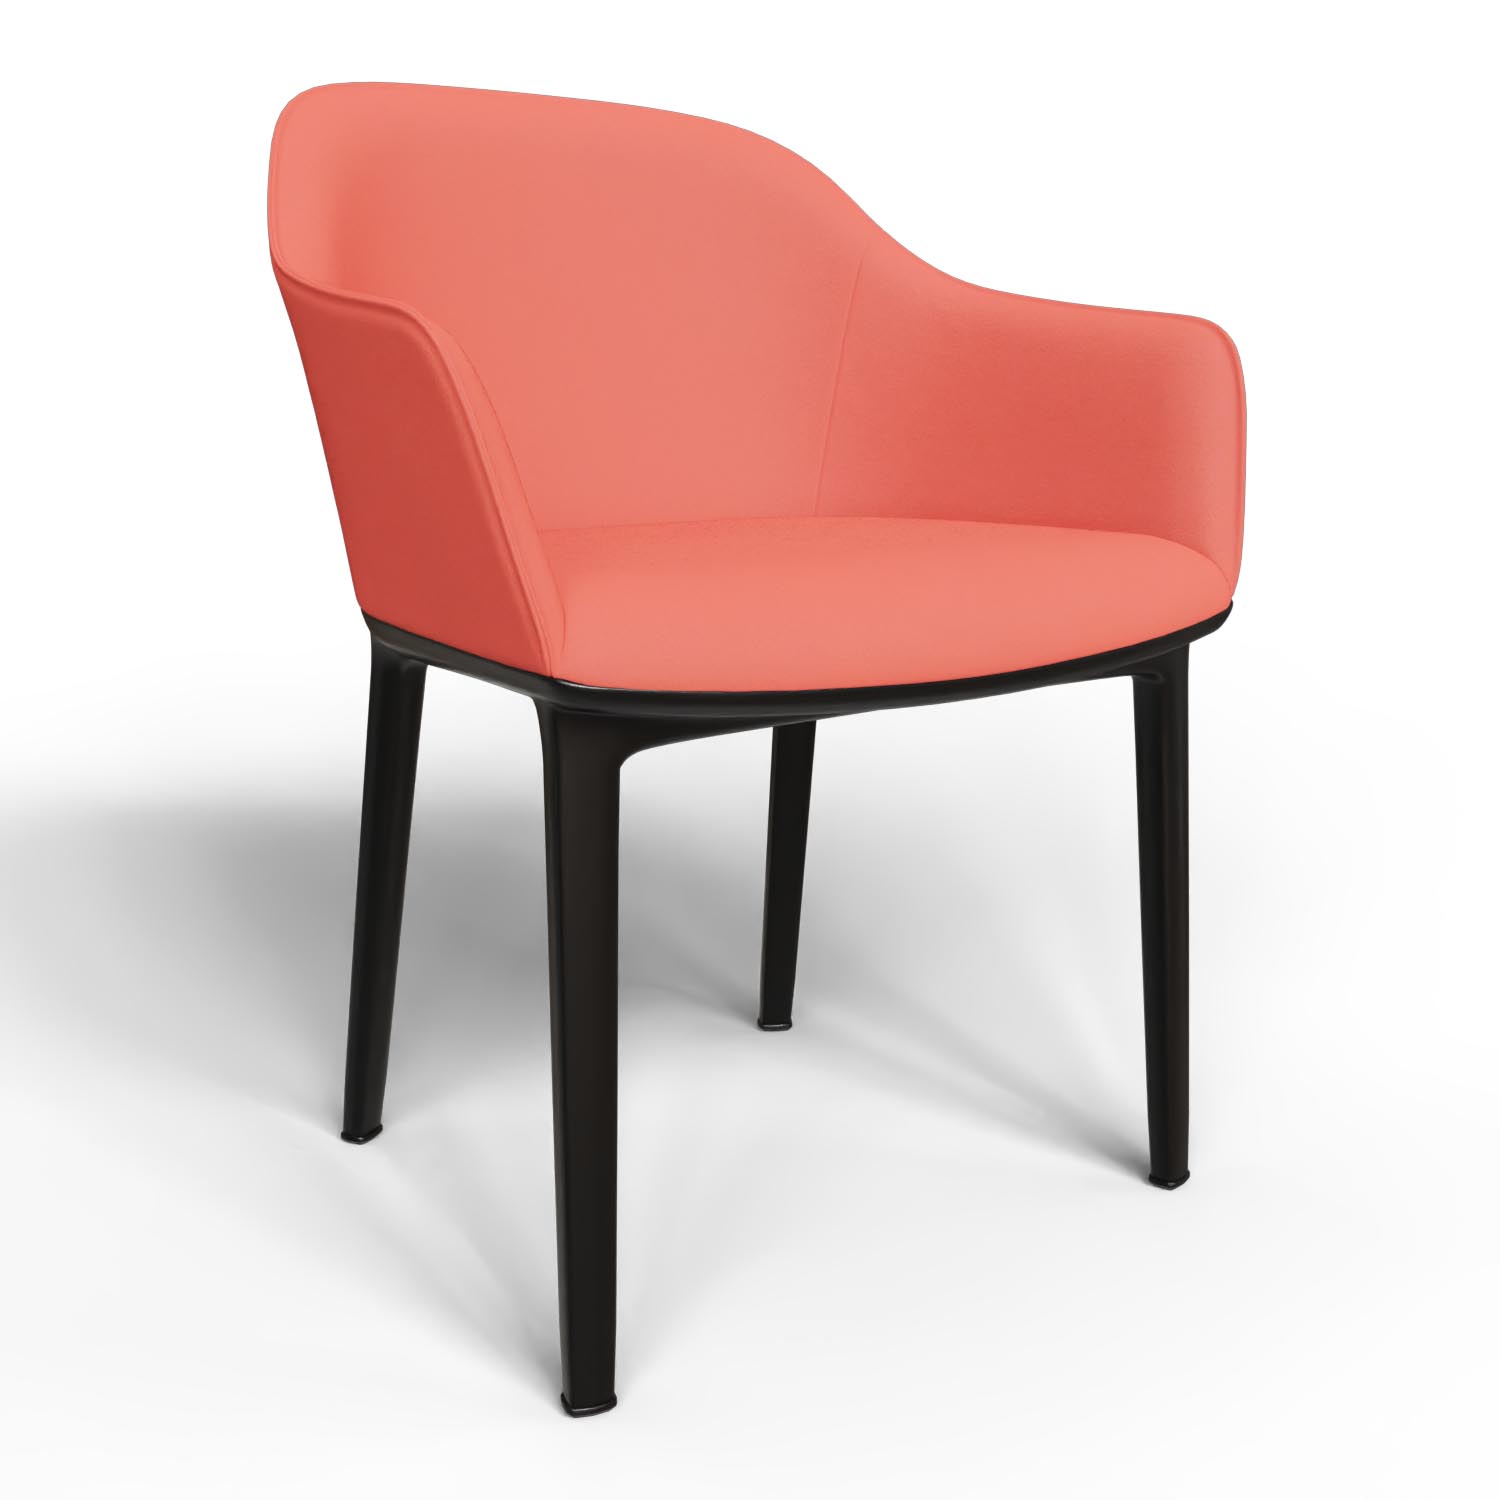 Softshell Chair 42300600 in Poppy Red